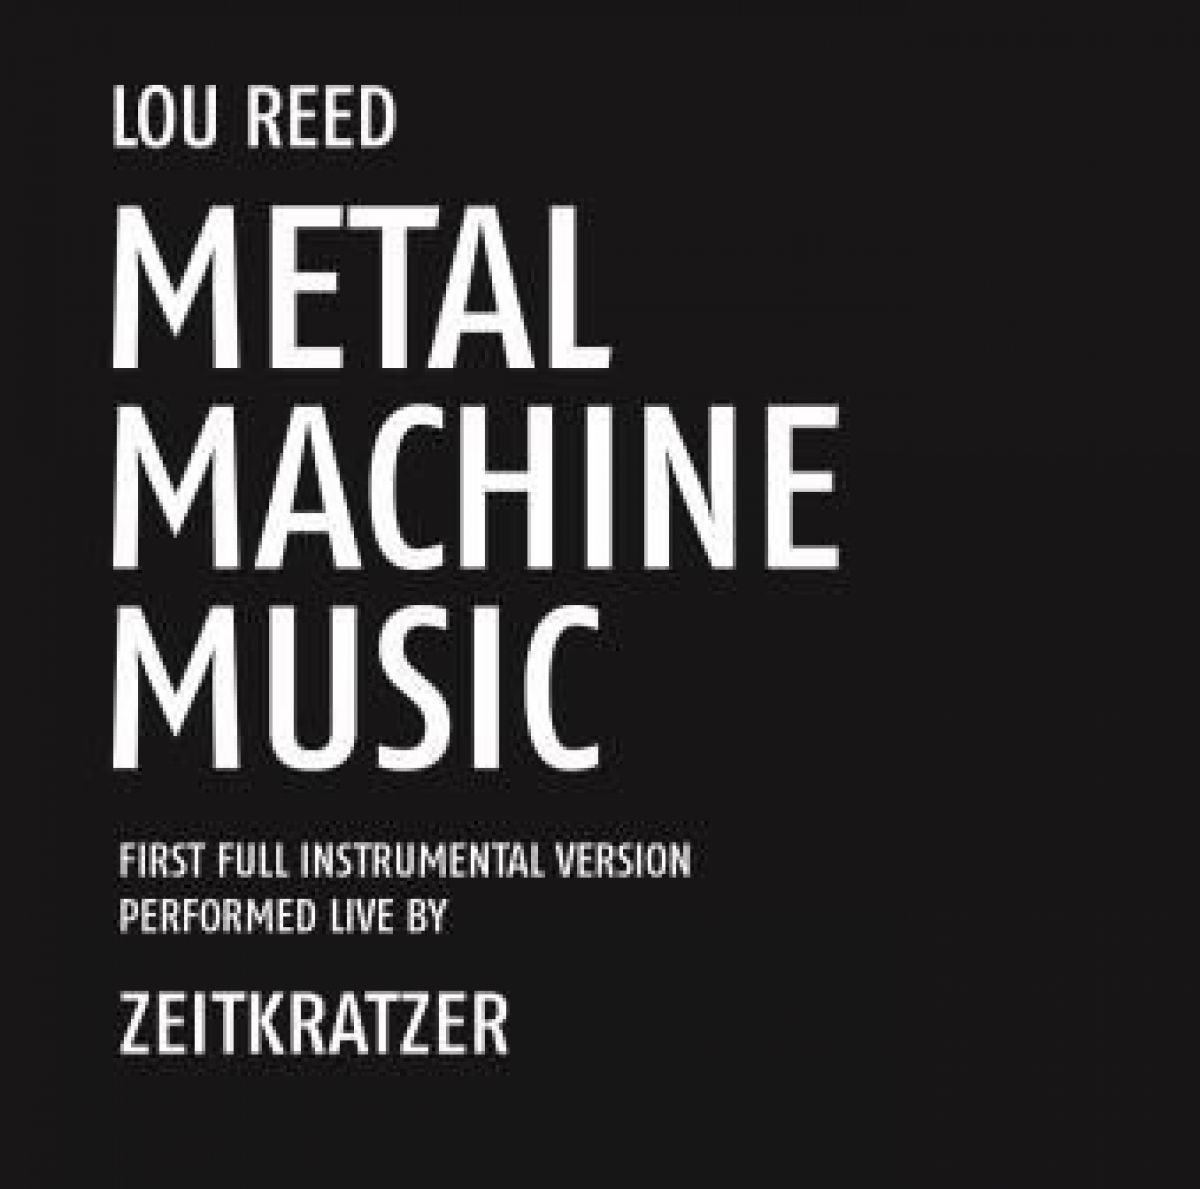 zkr0016-cover-lou-reed-mmm-lowres